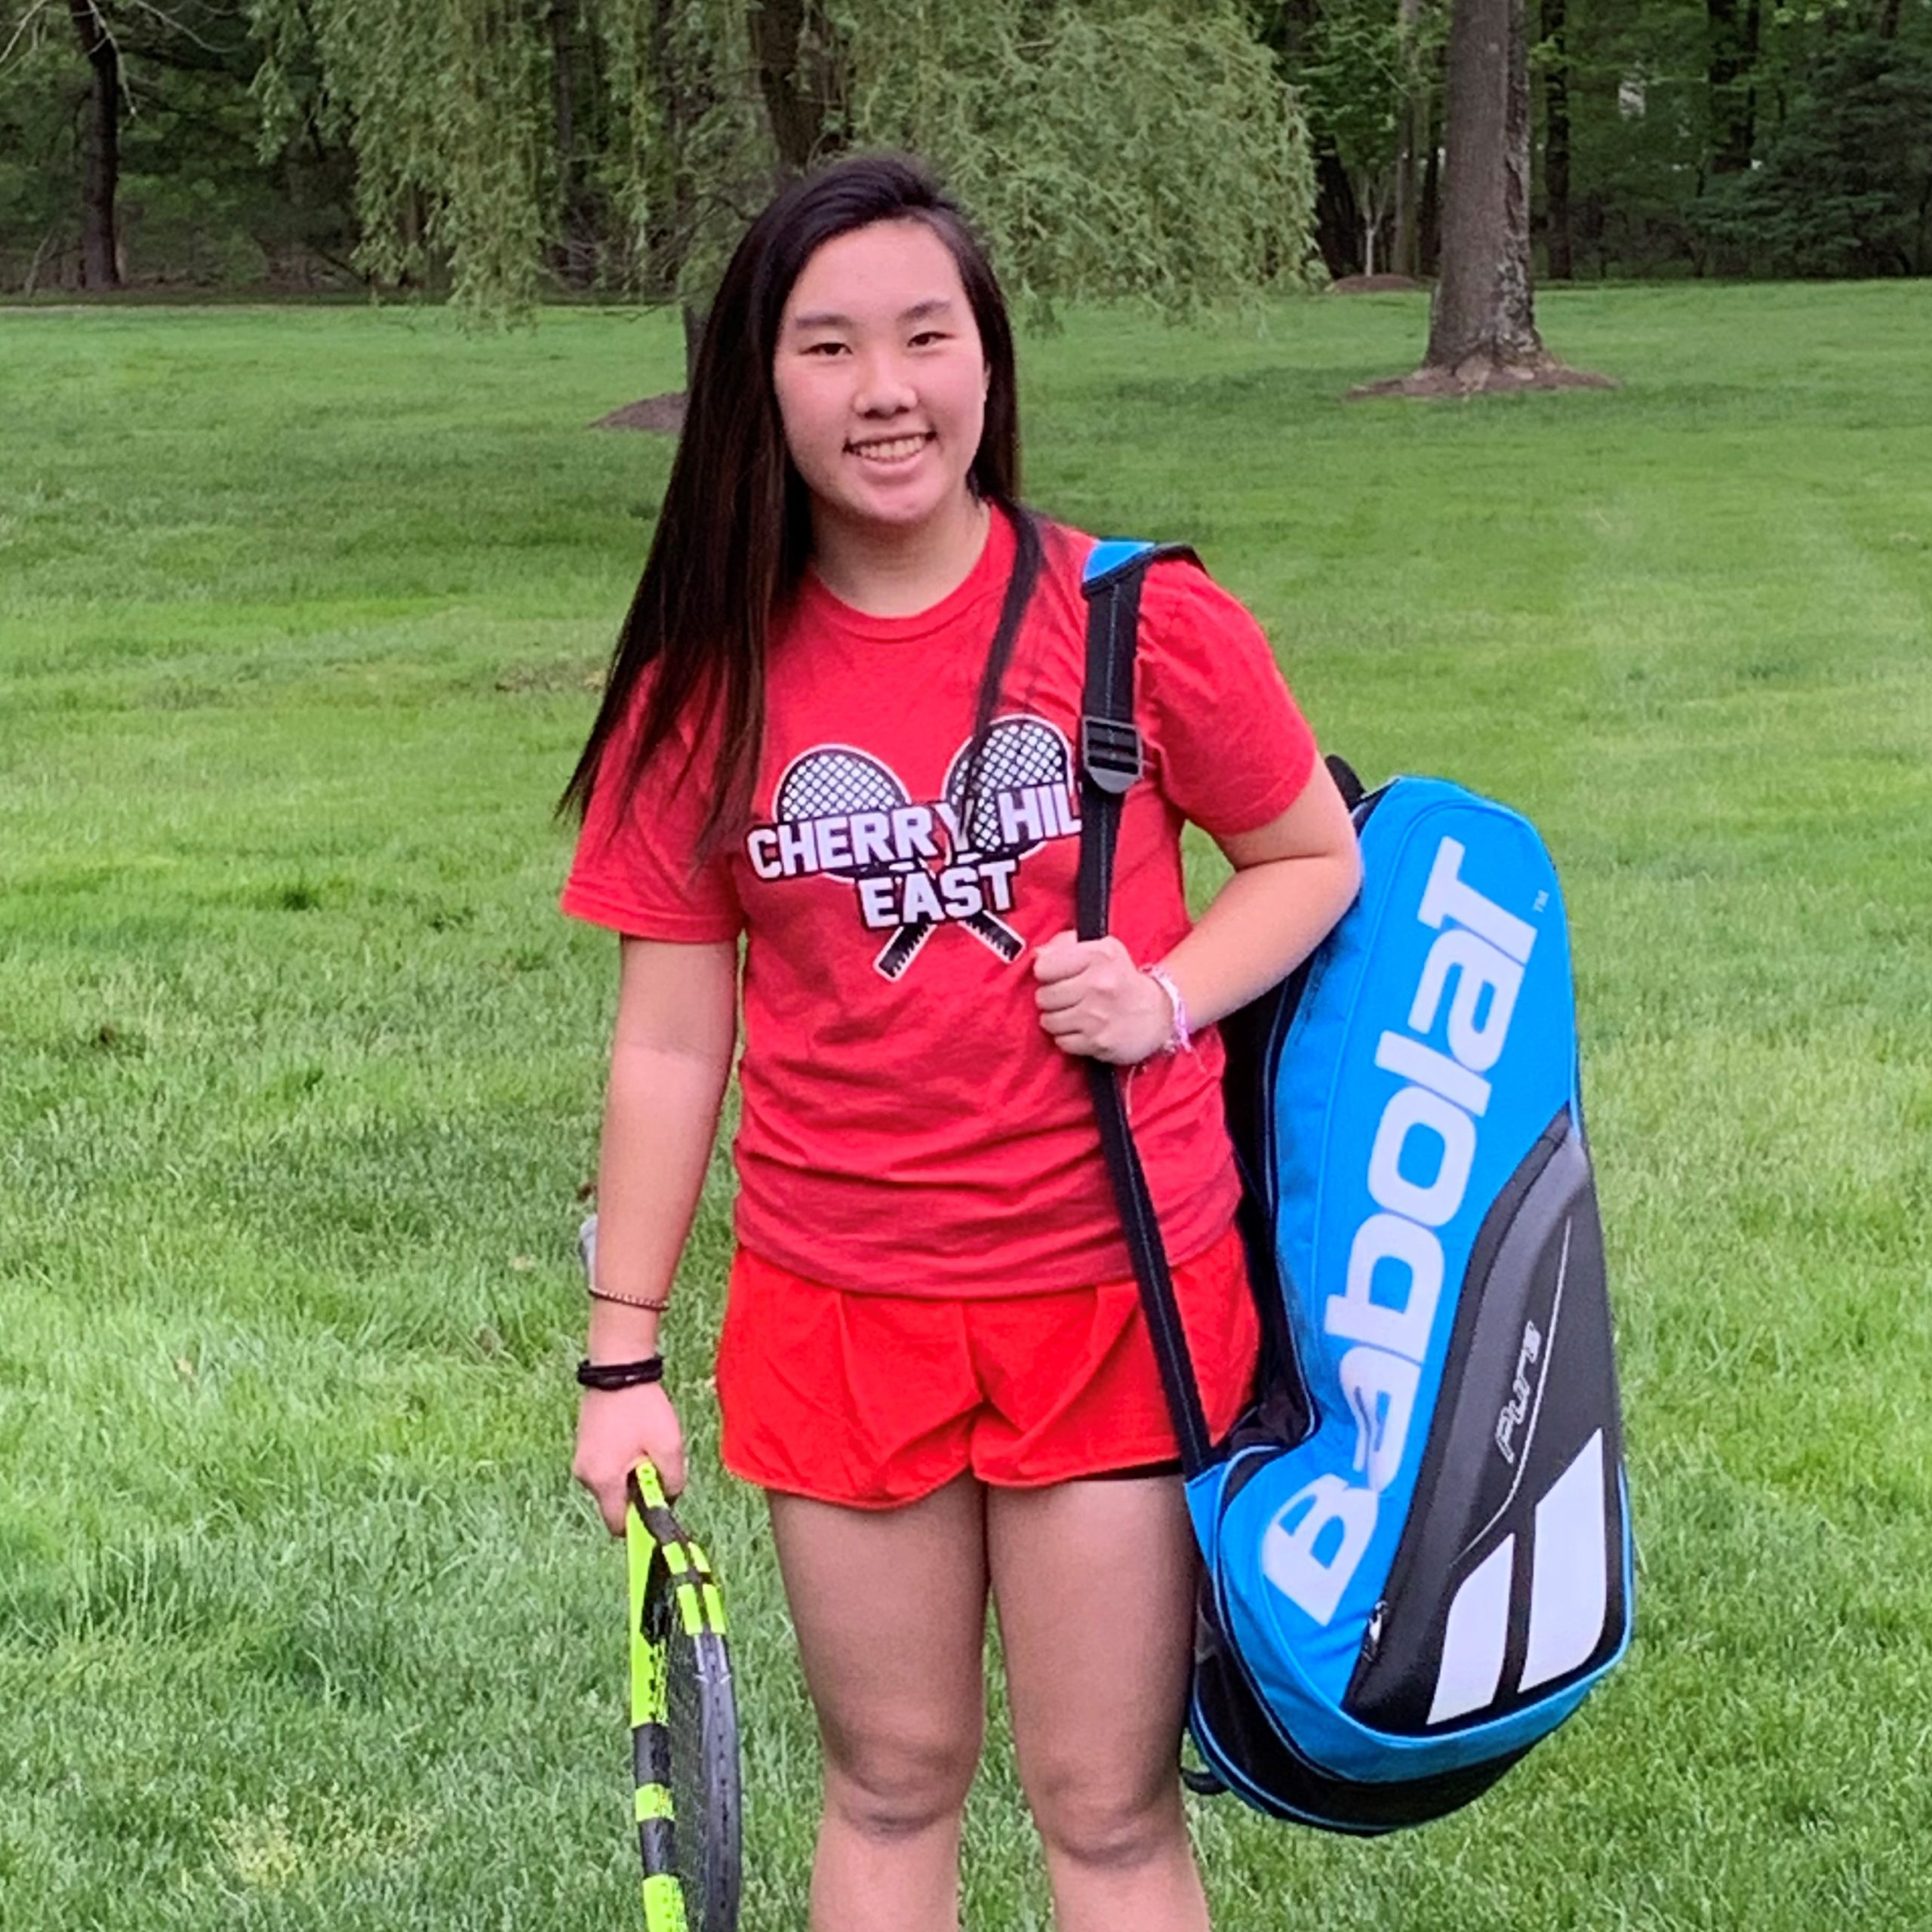 Julia smiling while holding lacrosse equipment